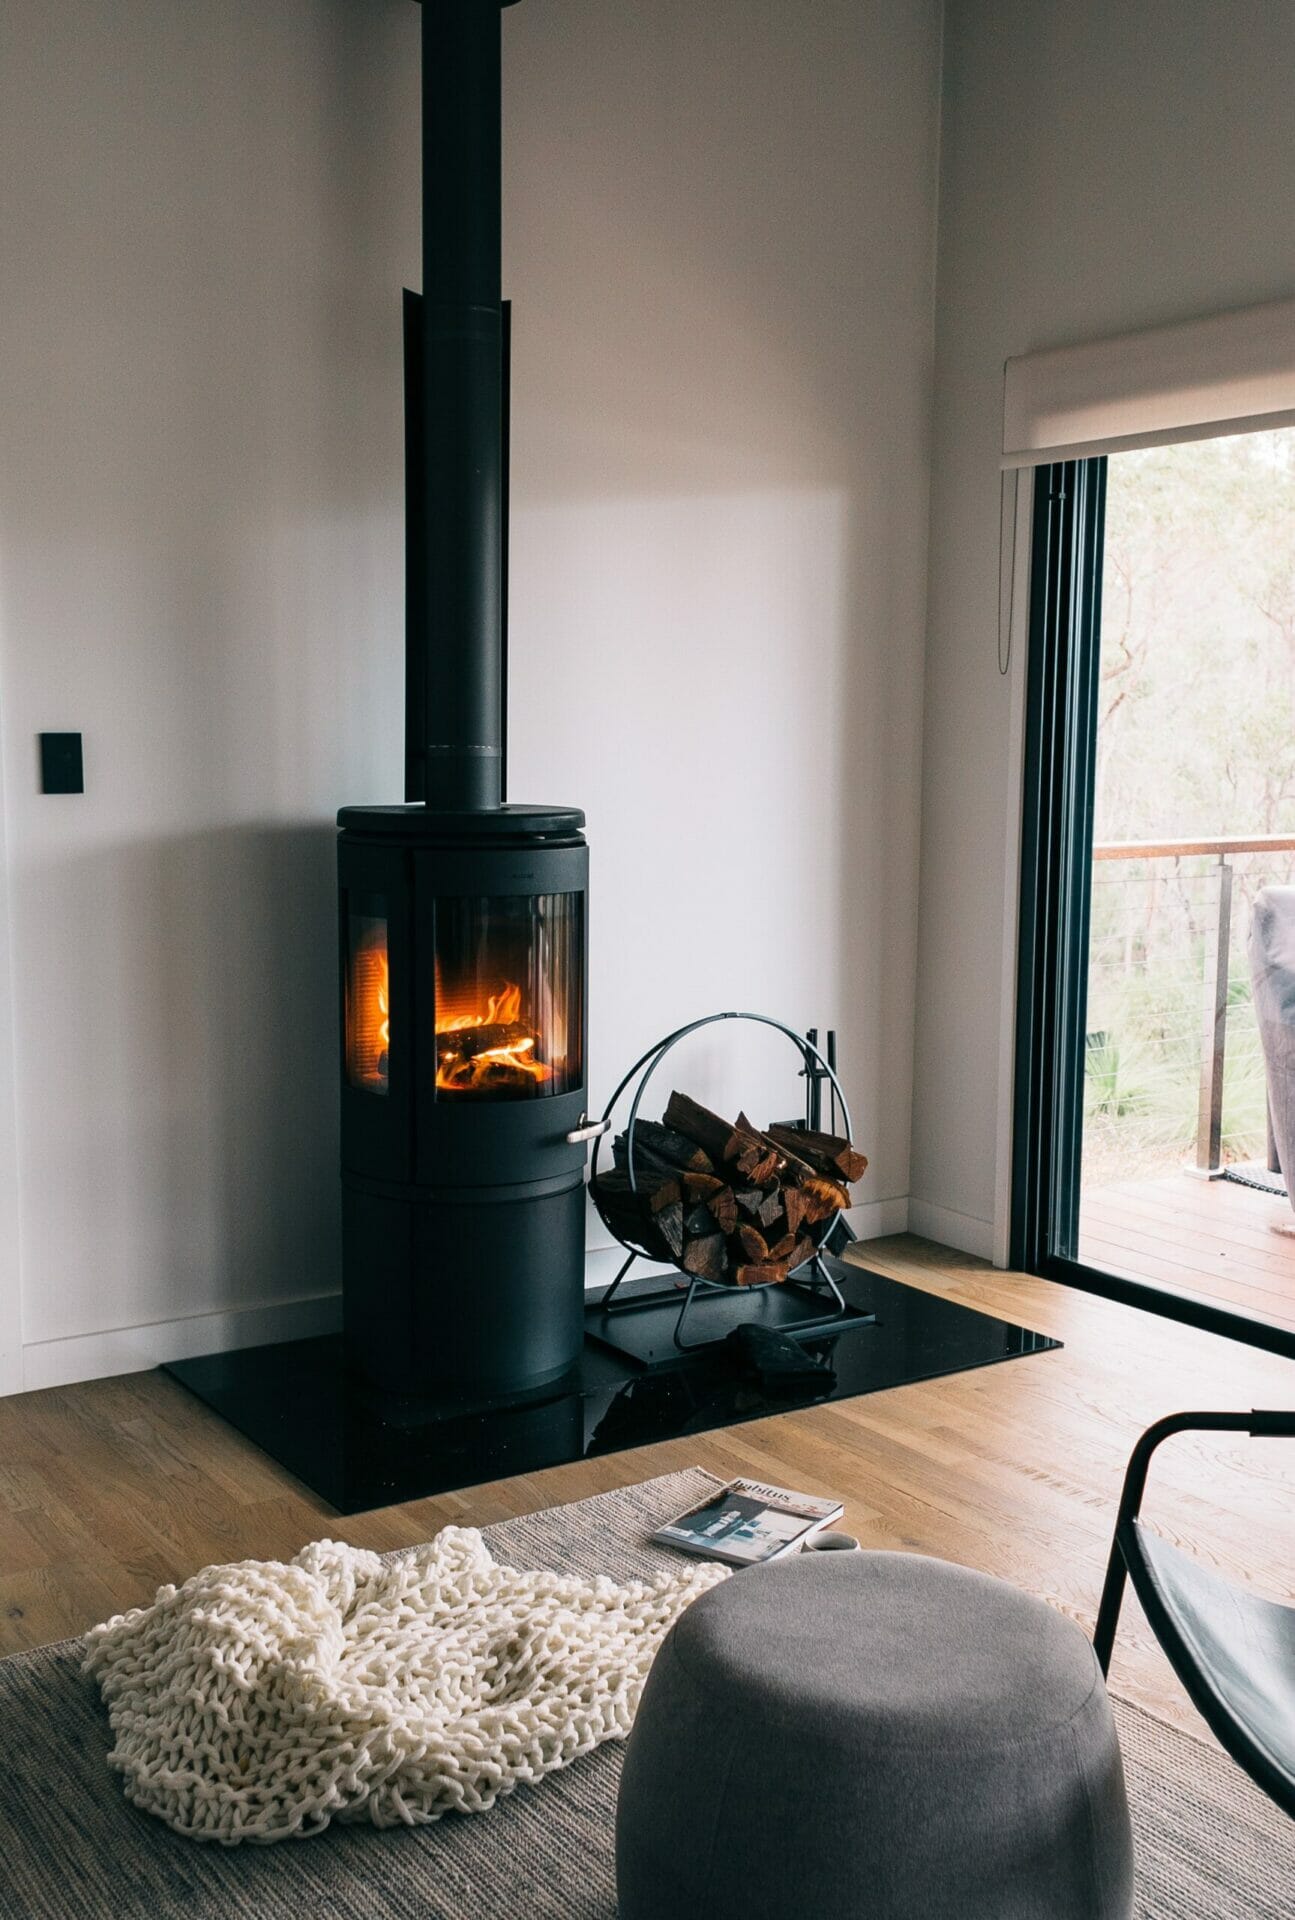 Seven Perks of Having a Fireplace in Your Home